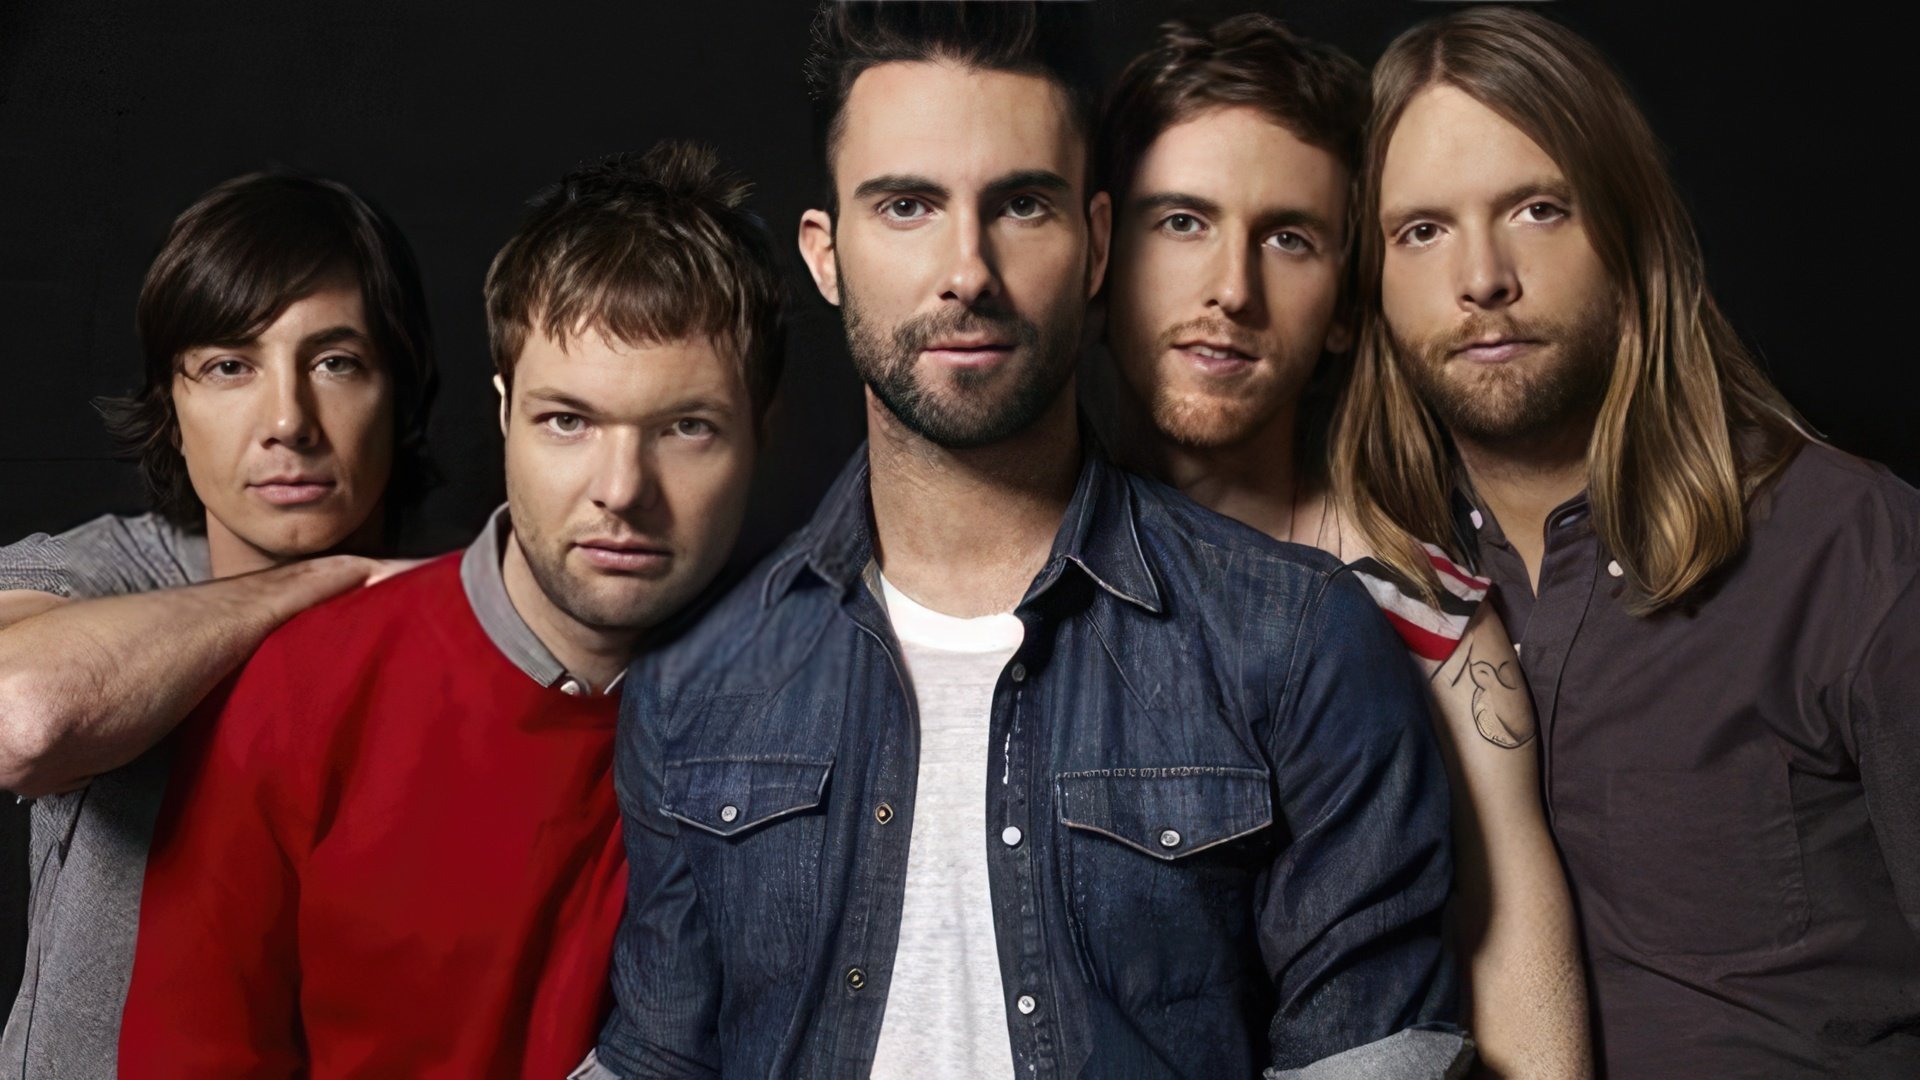 The band Maroon 5